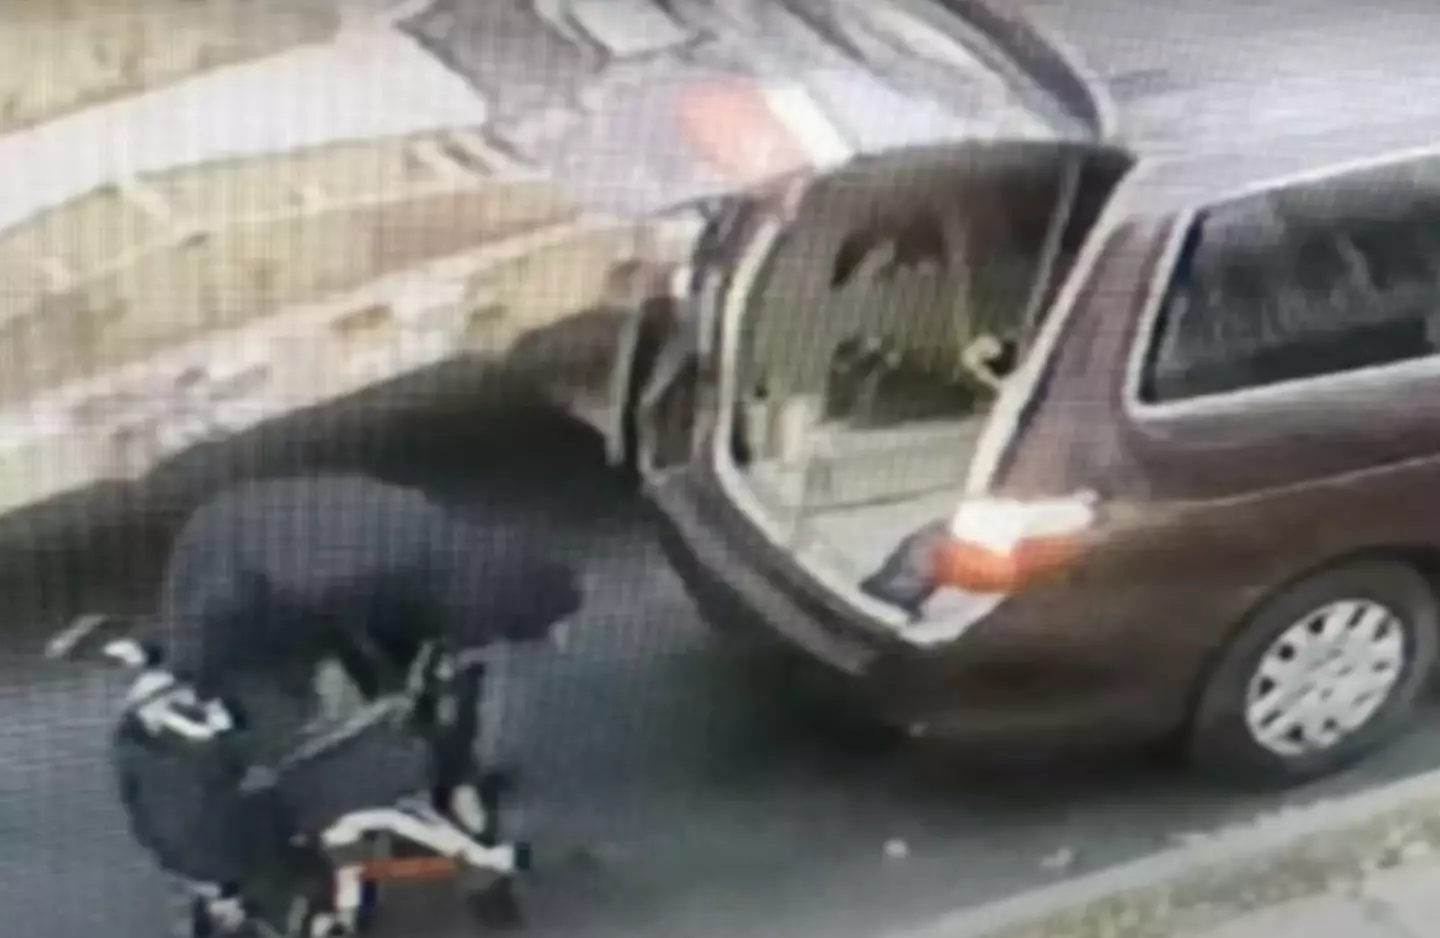 CCTV footage outside the home showed a man steal the wheelchair and put it in his car